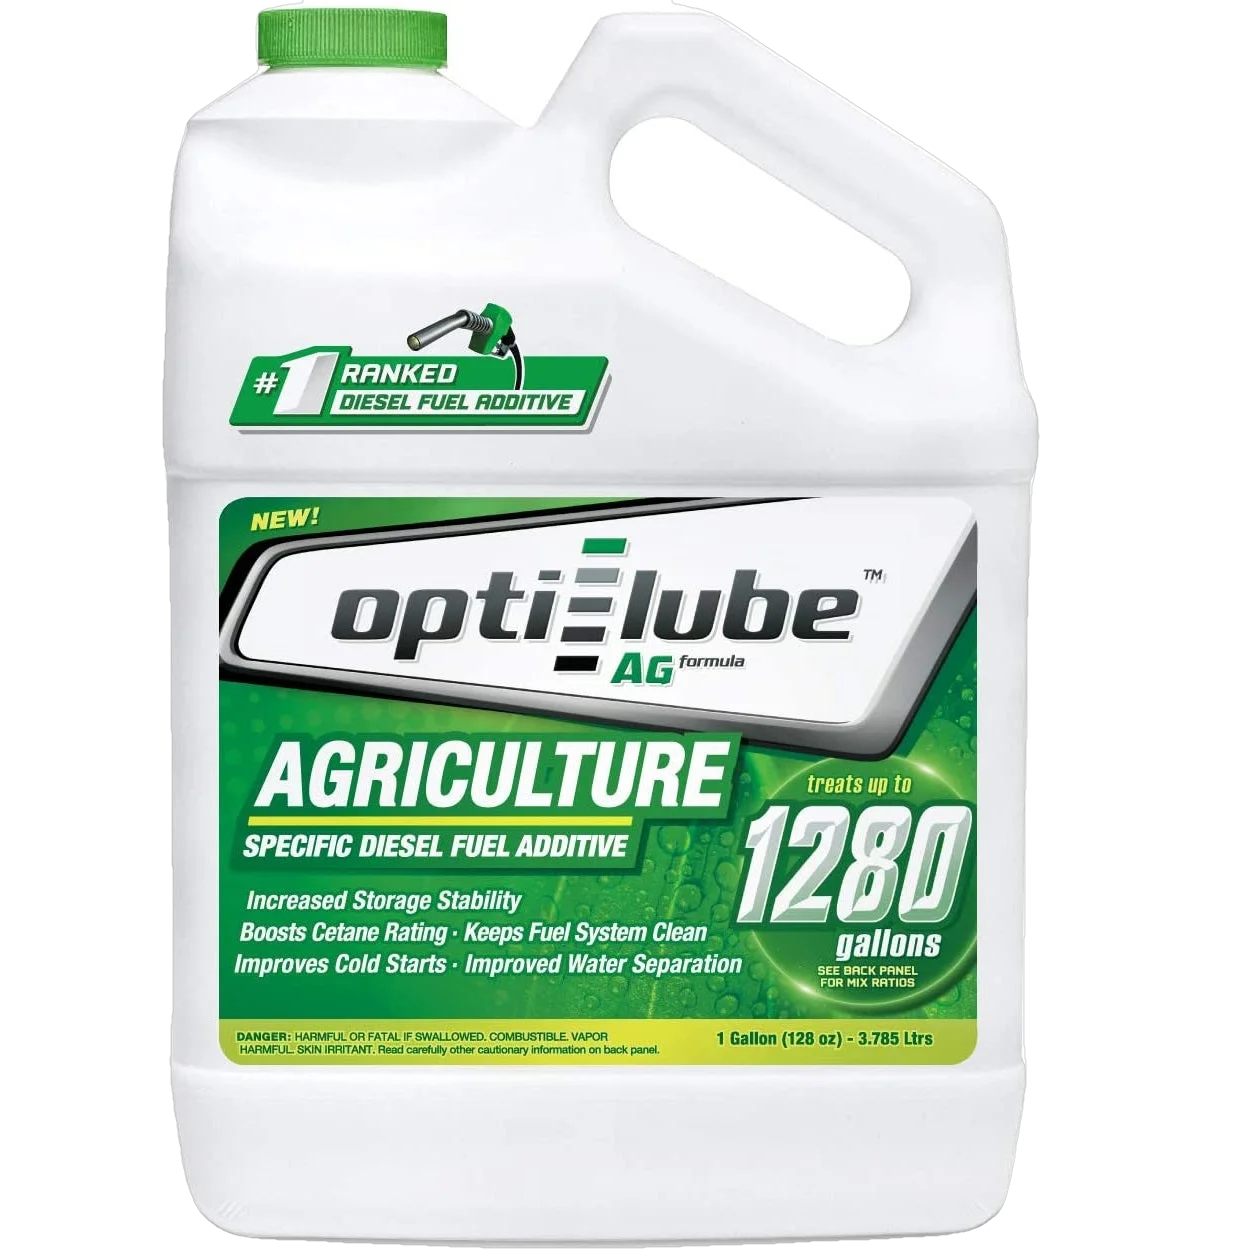 Opti-Lube Ag Agriculture Formula Diesel Fuel Additive: 1 Gallon, Treats 1280 Gallons